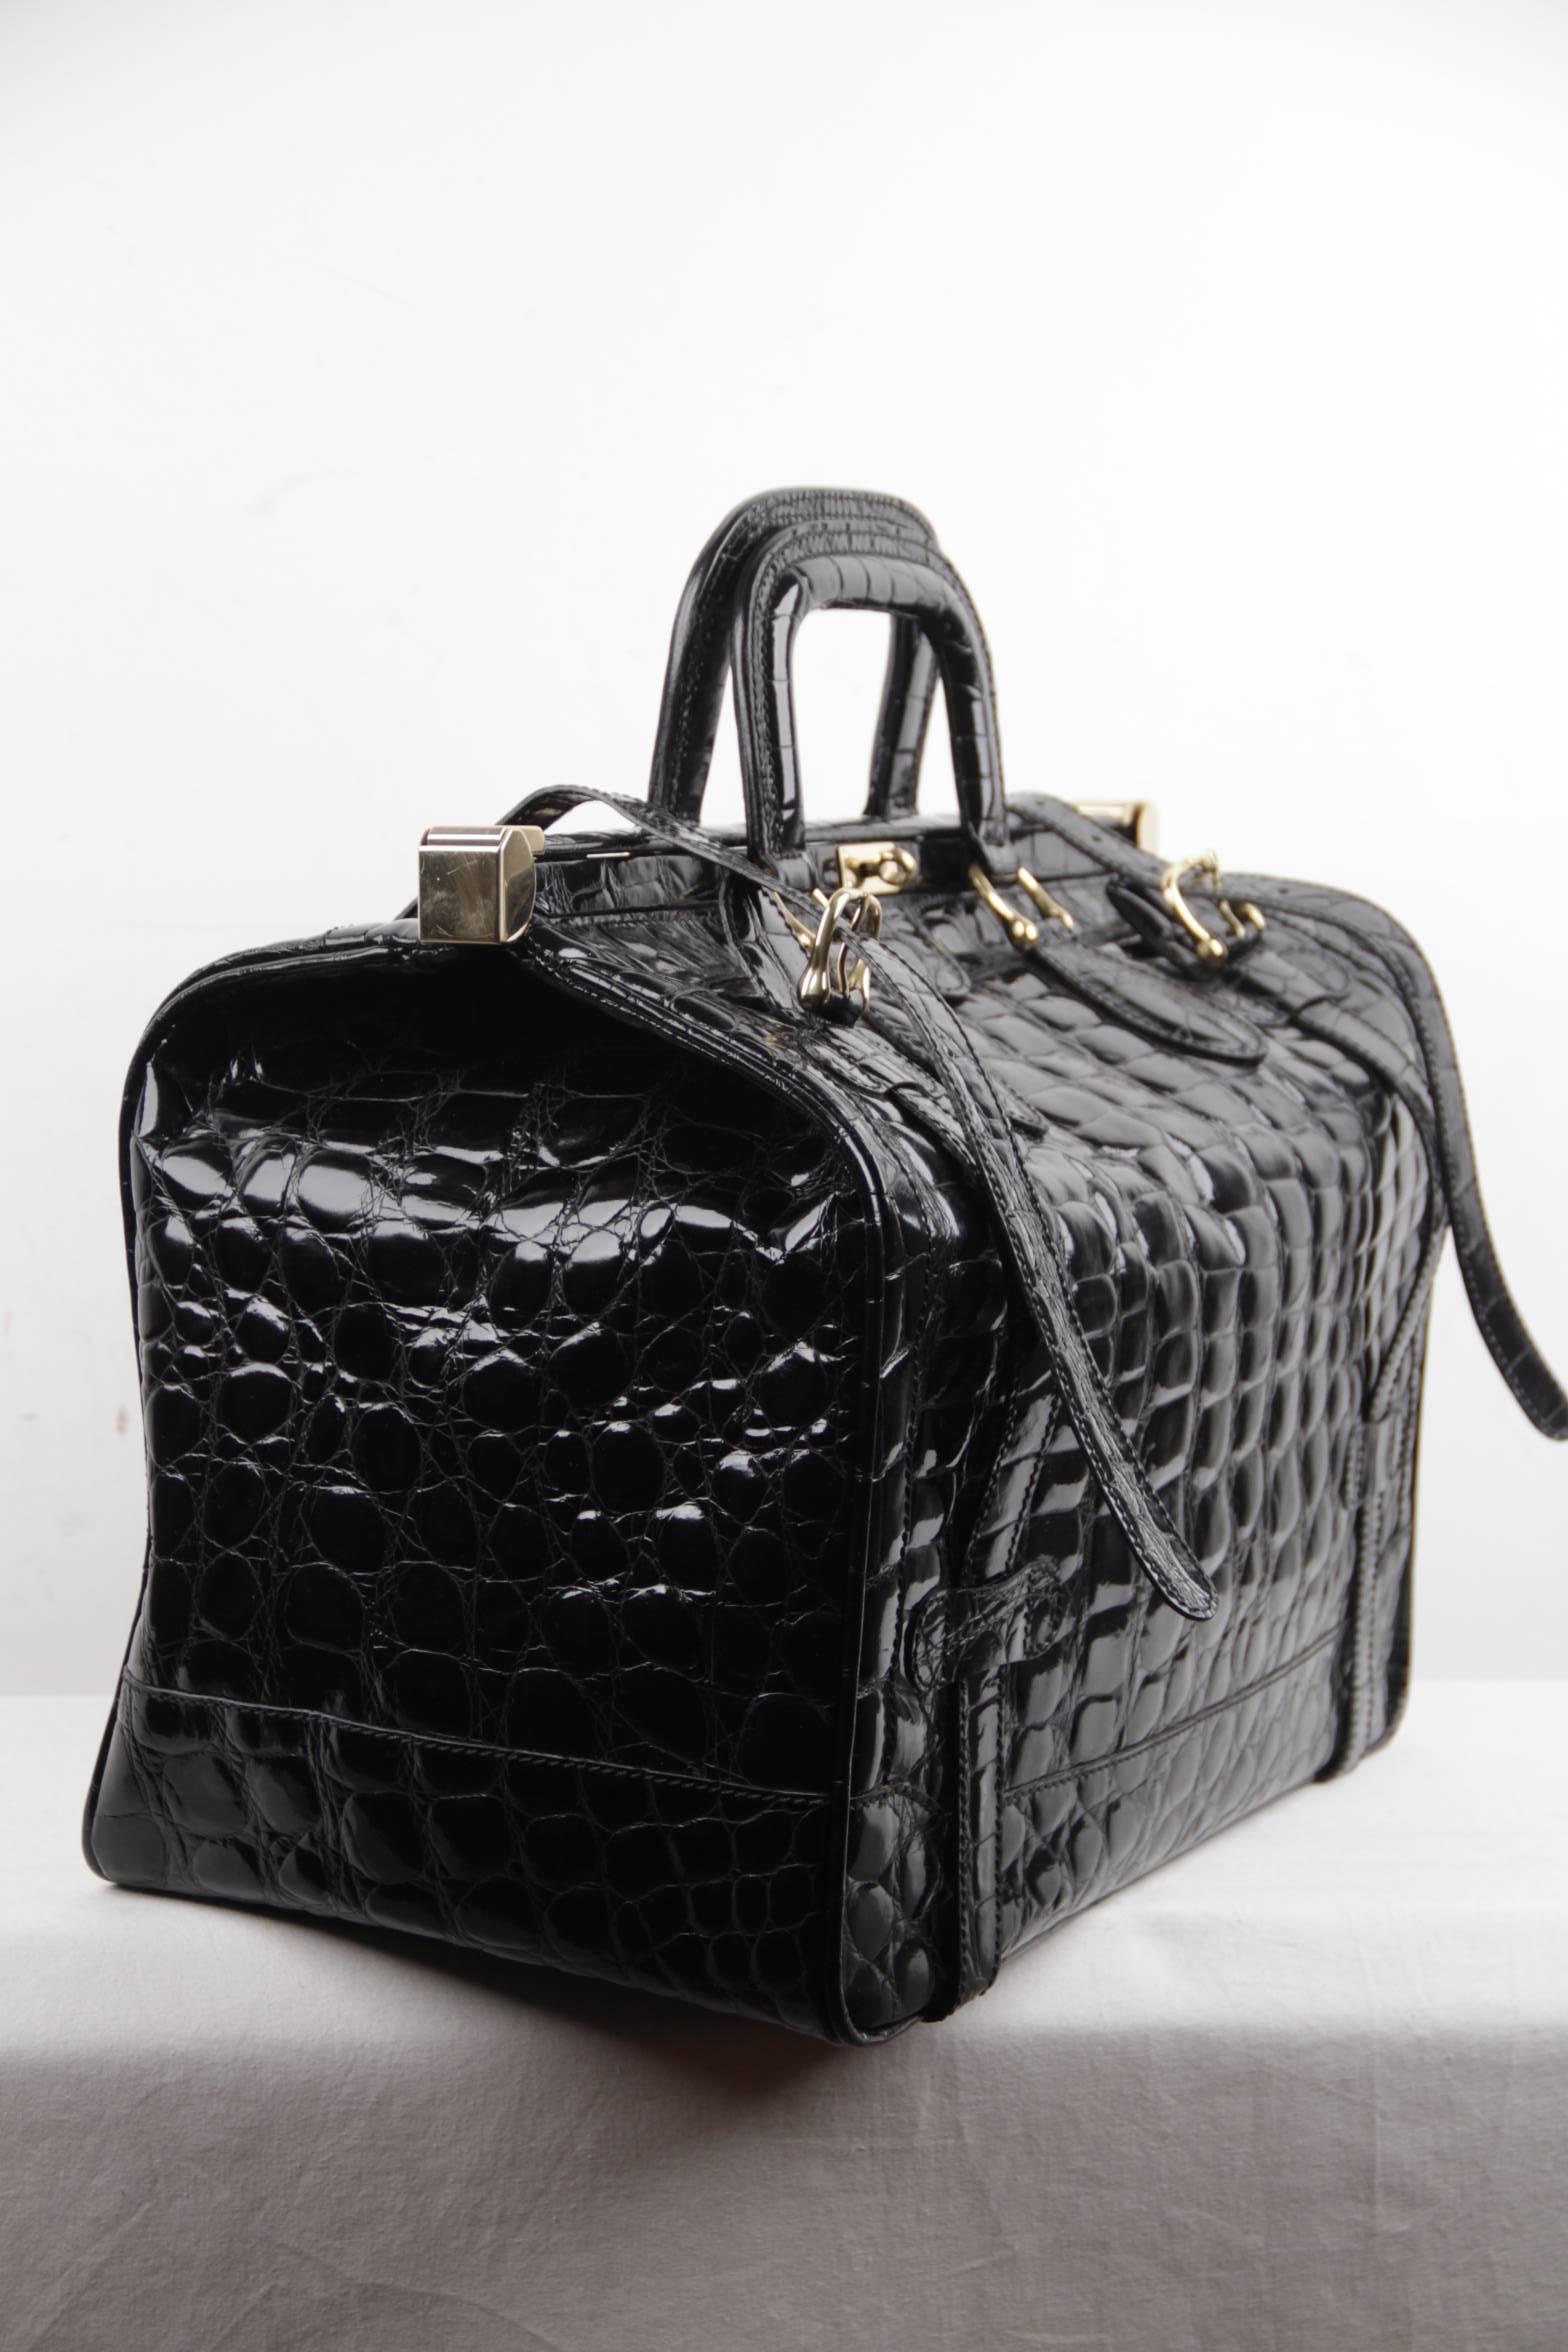 
- Crafted in black patent leather

- Embossed crocoile pattern

- Double clasp closure and front twist closure

- Additional double strap closure

- 5 bottom feet

- Beige canvas lining

- 1 side zip pocket inside

- Gold metal hardware

- Approx.